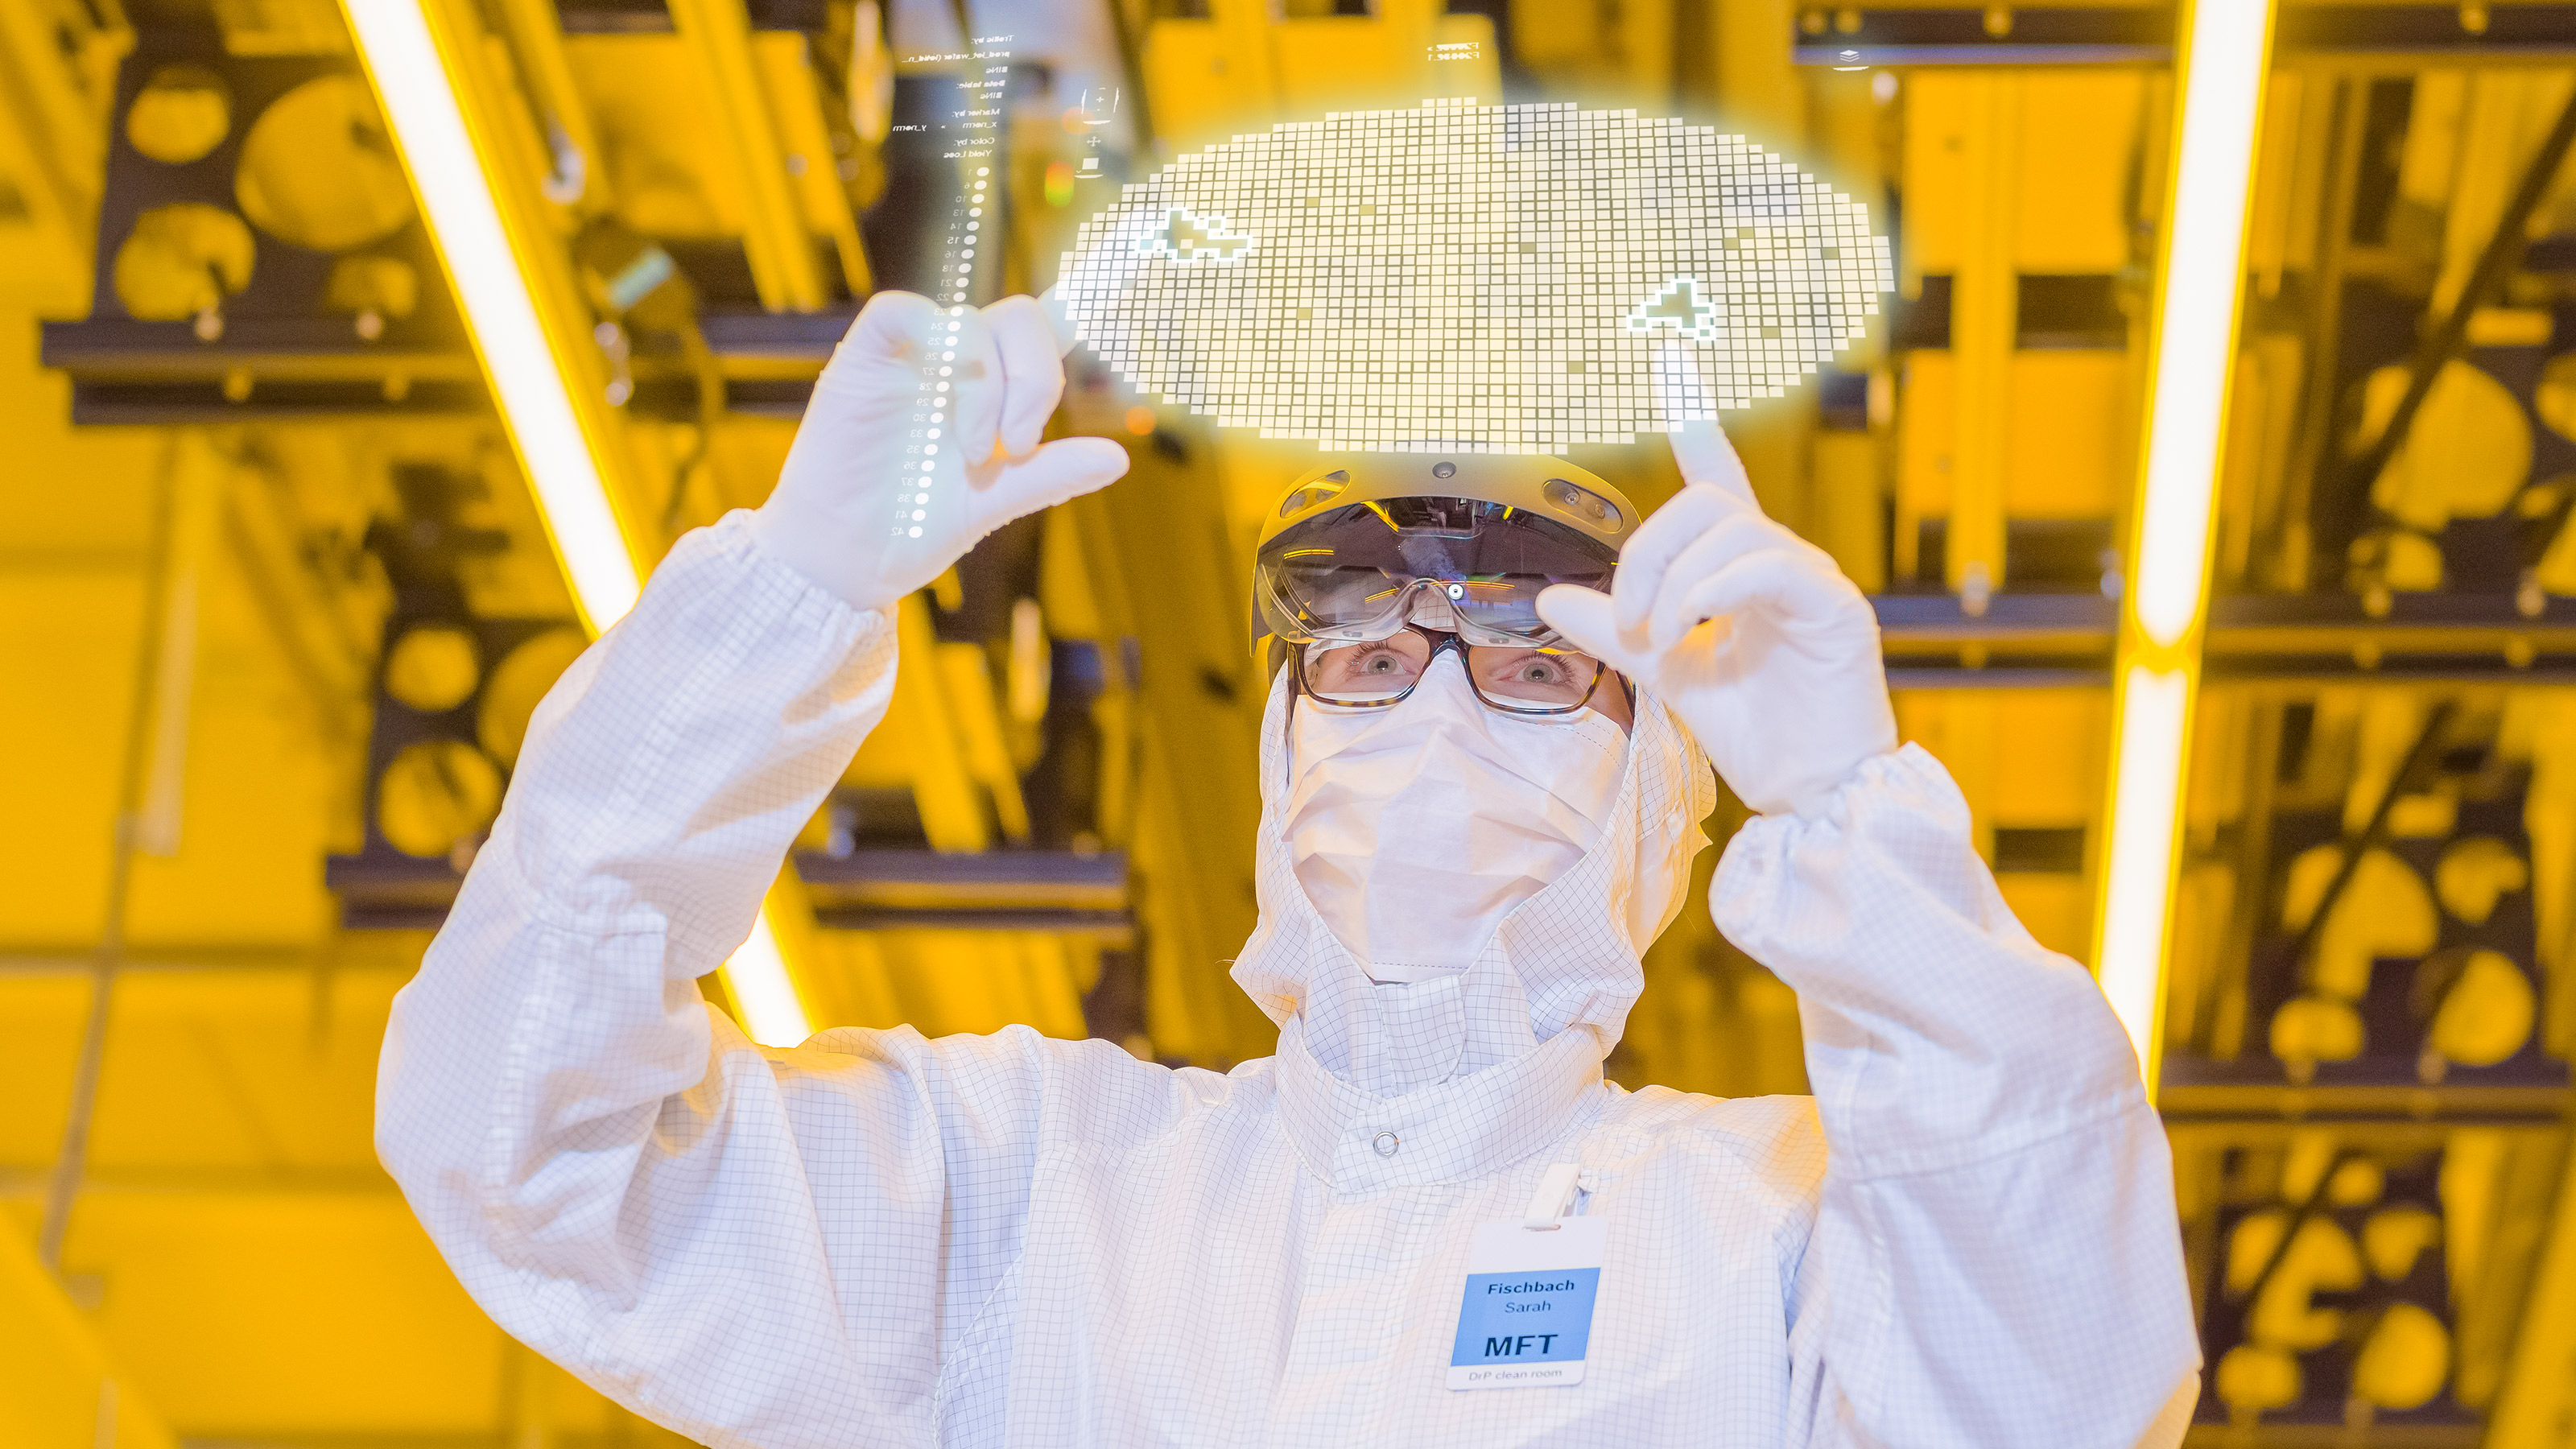 A clean room worker operates a virtual screen on which a wafer with chips can be seen